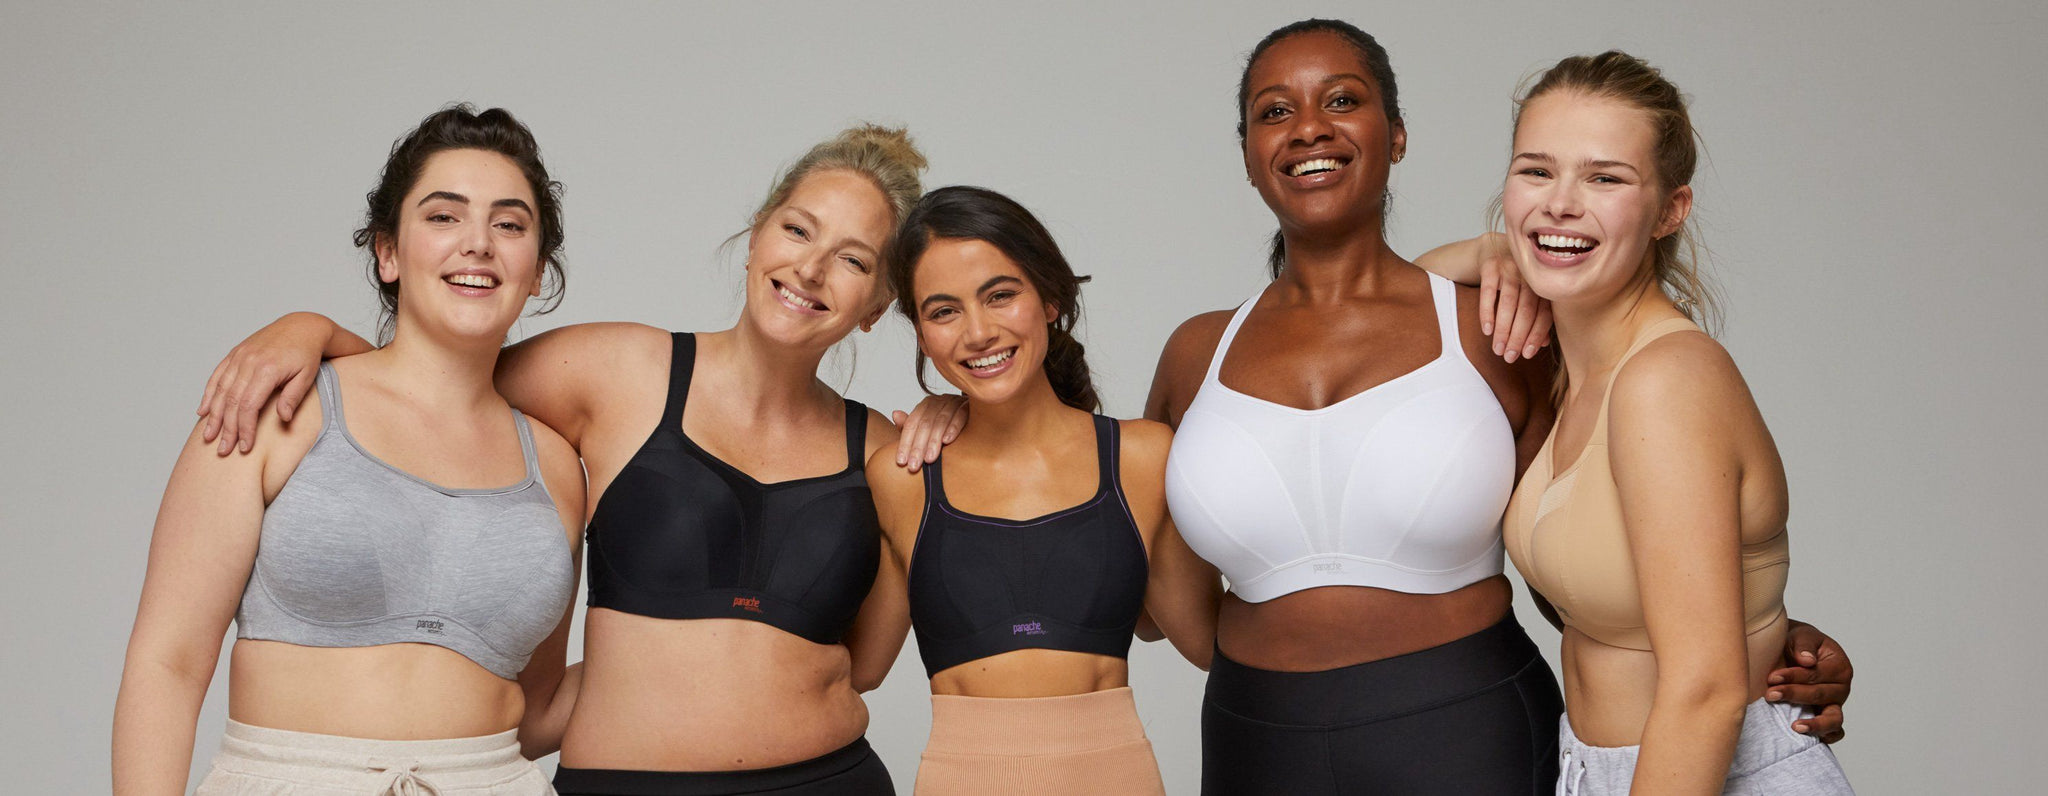 Panache Sports Bras in D cup and above